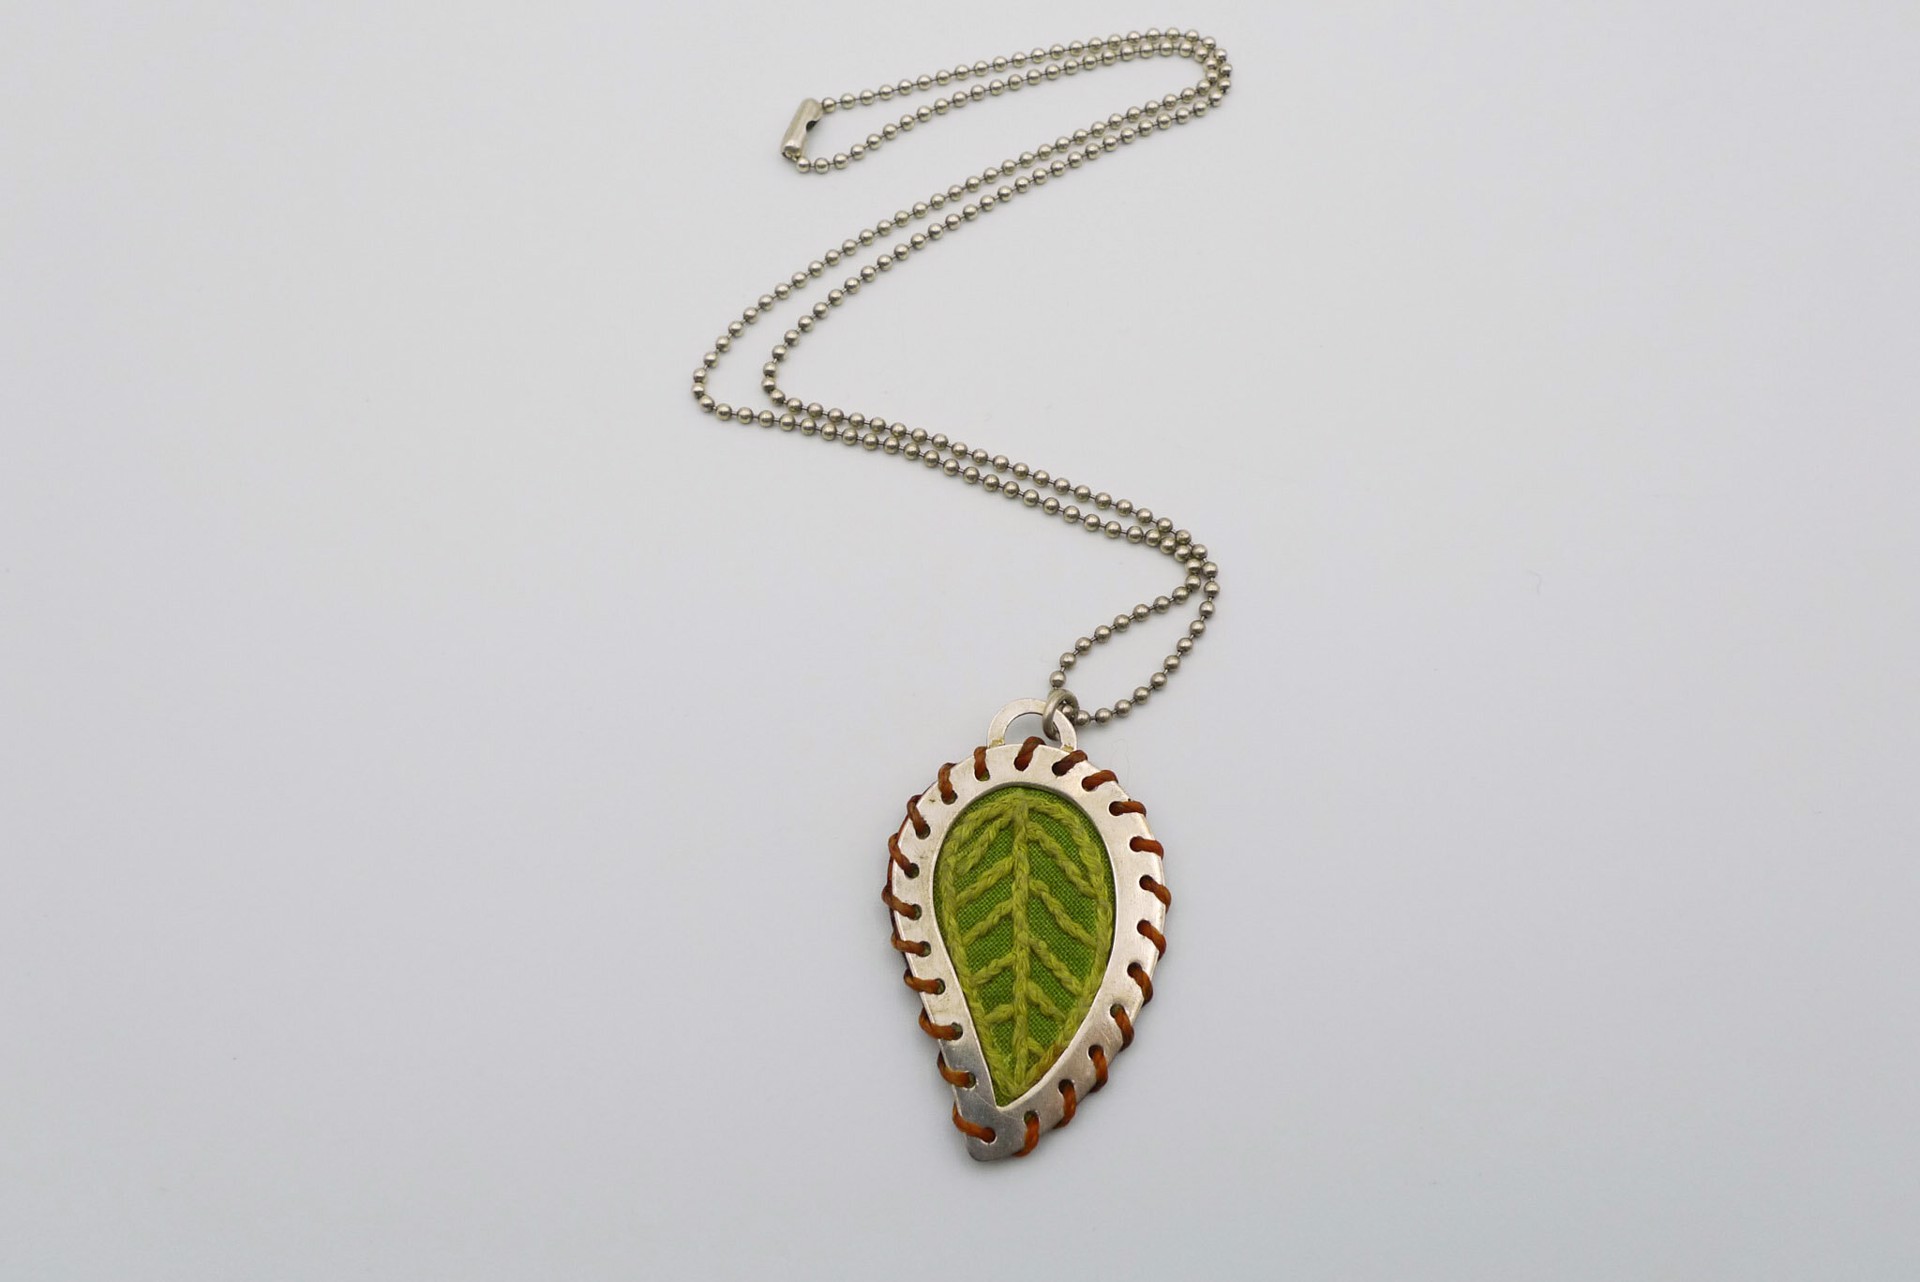 Reversible Leaf Necklace by Alison L. Bailey